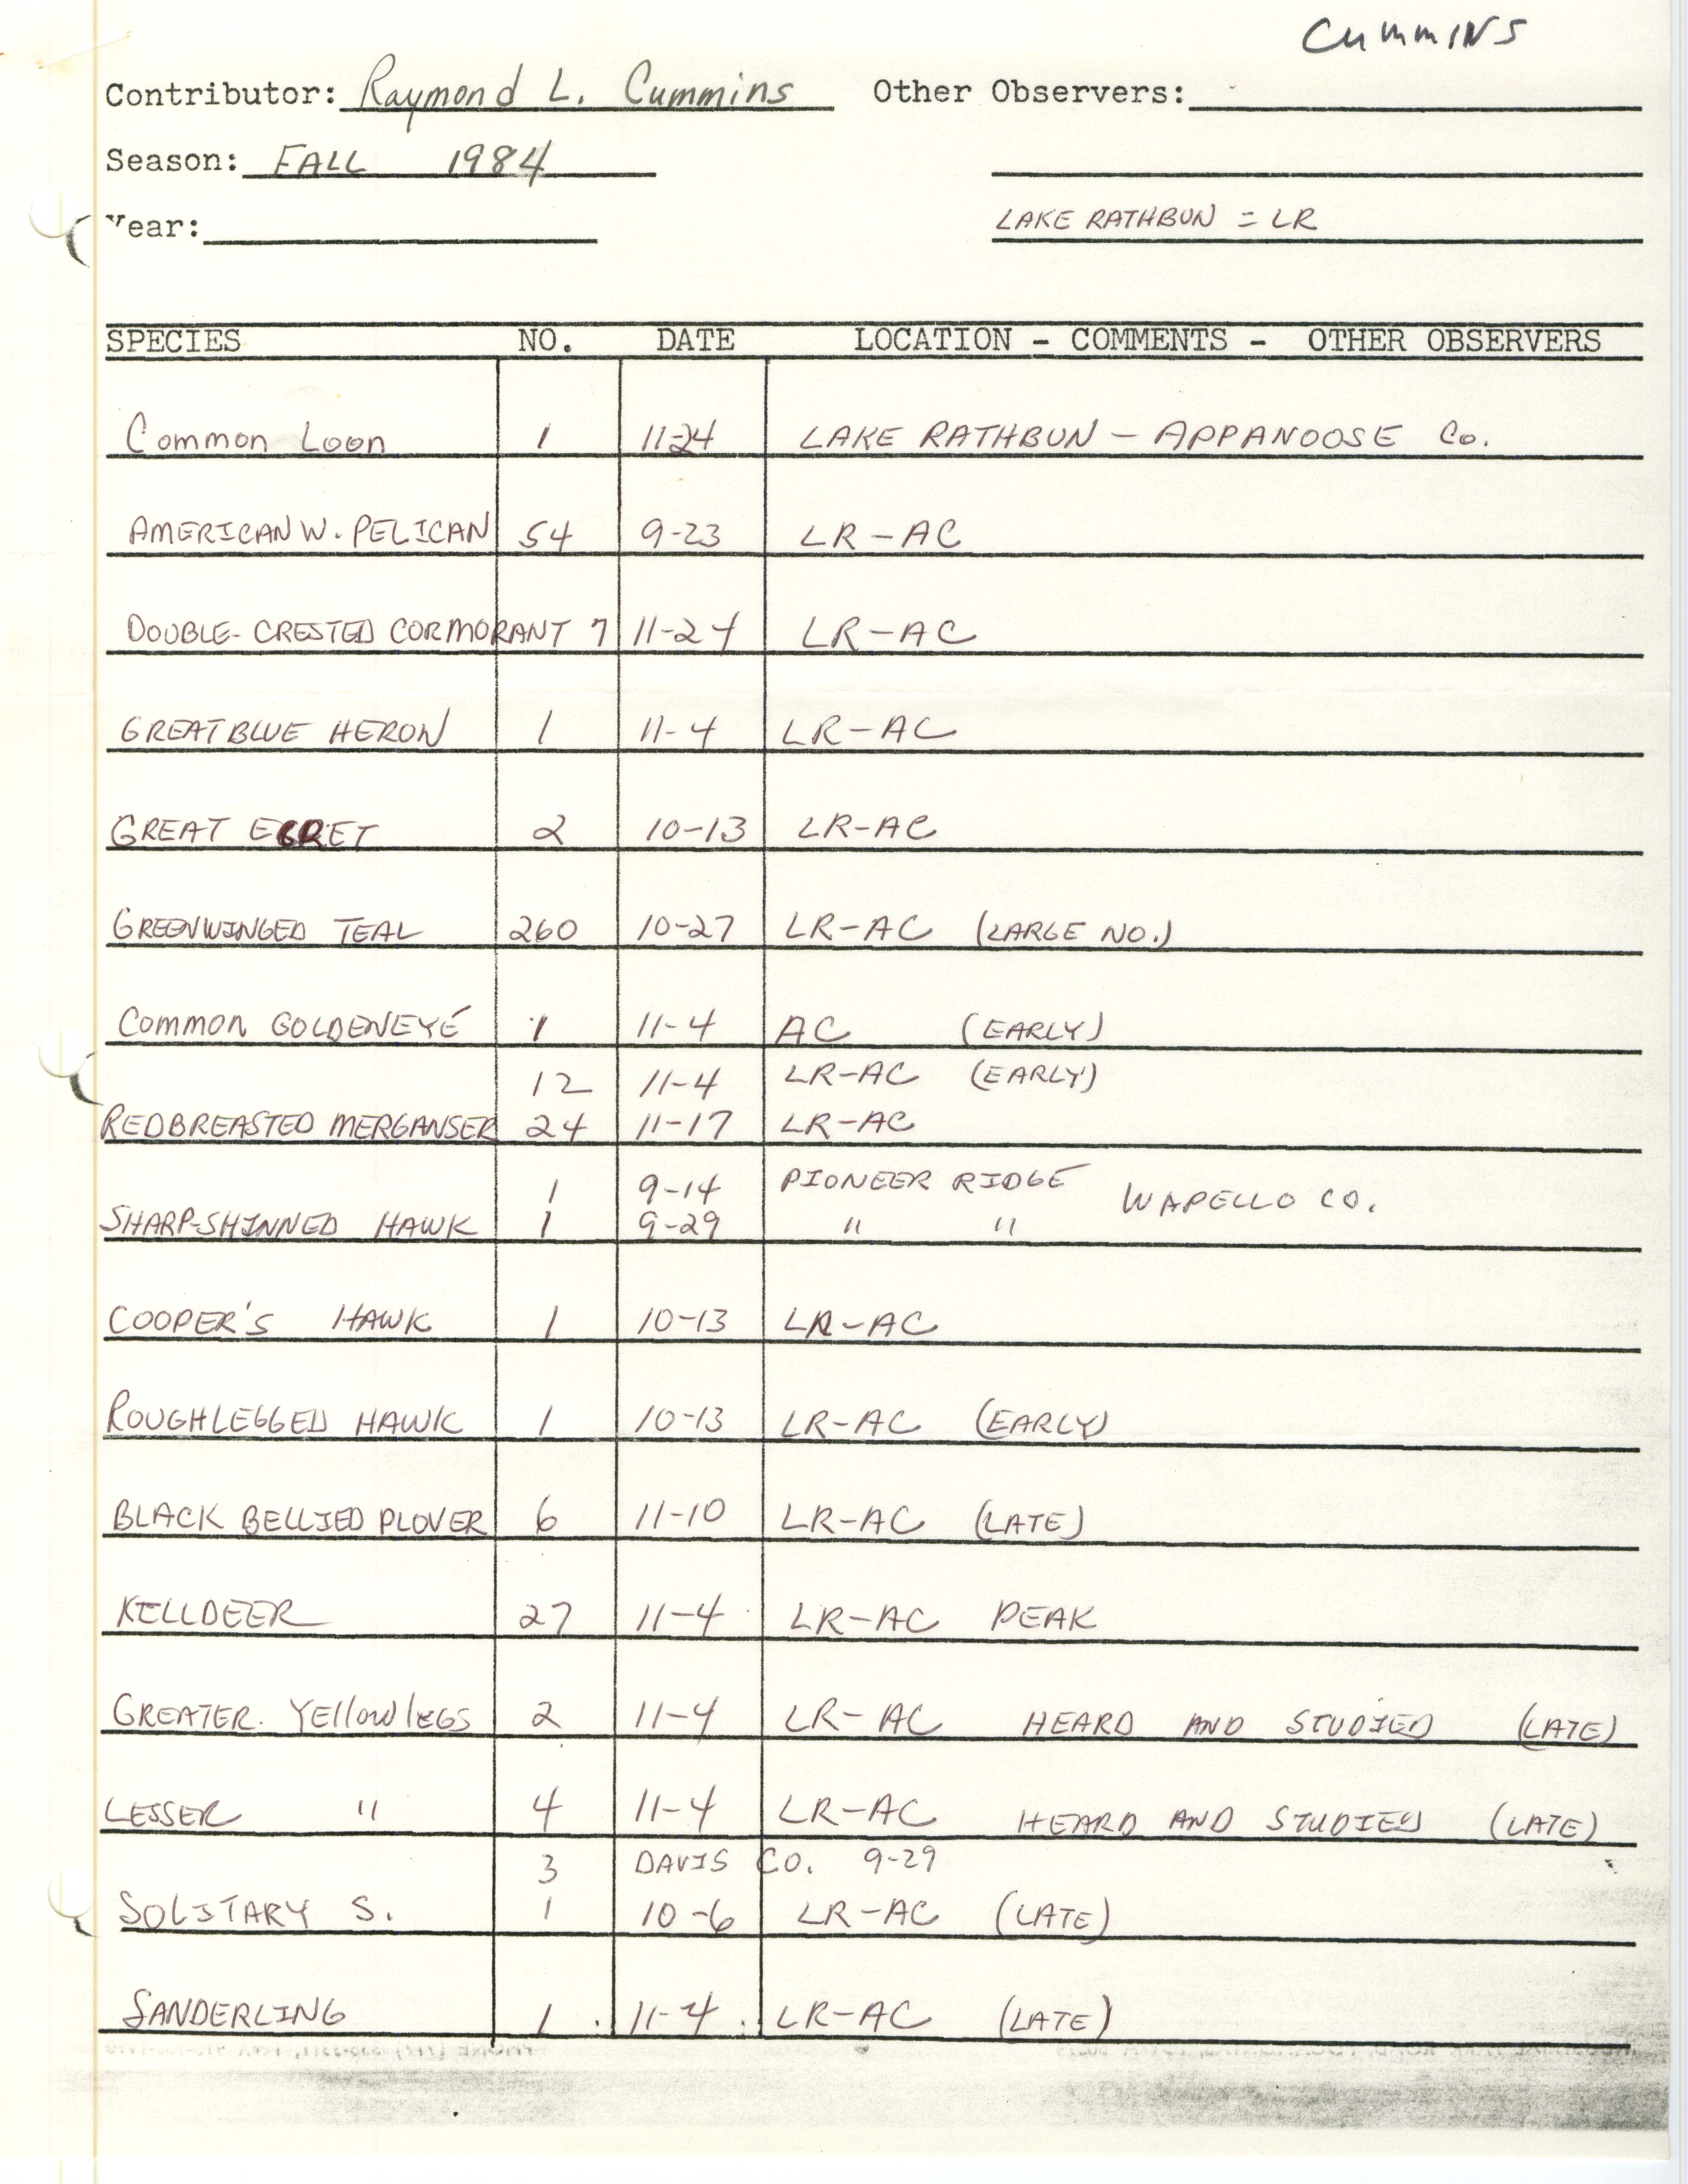 Field notes contributed by Raymond L. Cummins, fall 1984